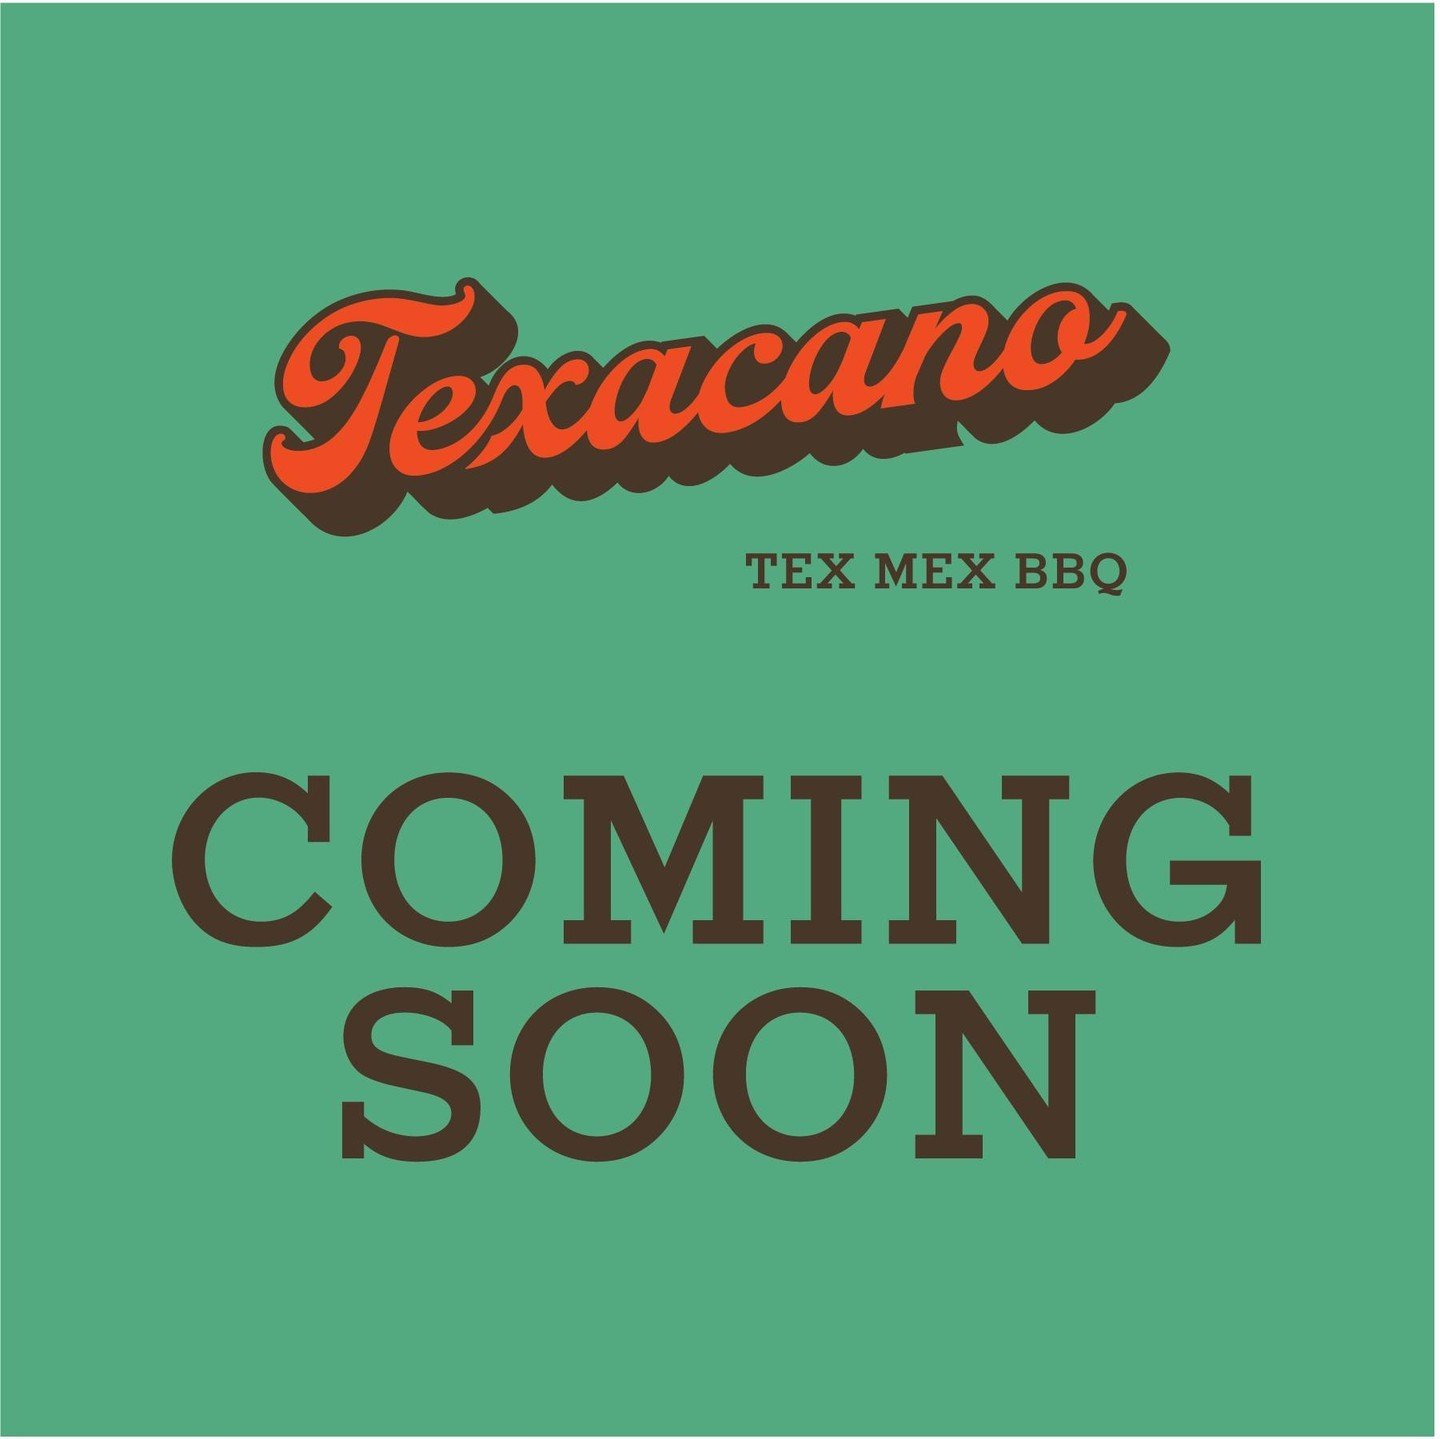 Our grand opening is just around the corner on Wednesday, May 15th @ 3pm. So get ready for a Tex-Mex fiesta like no other!  Stay tuned for exciting updates and exclusive opening offers!!